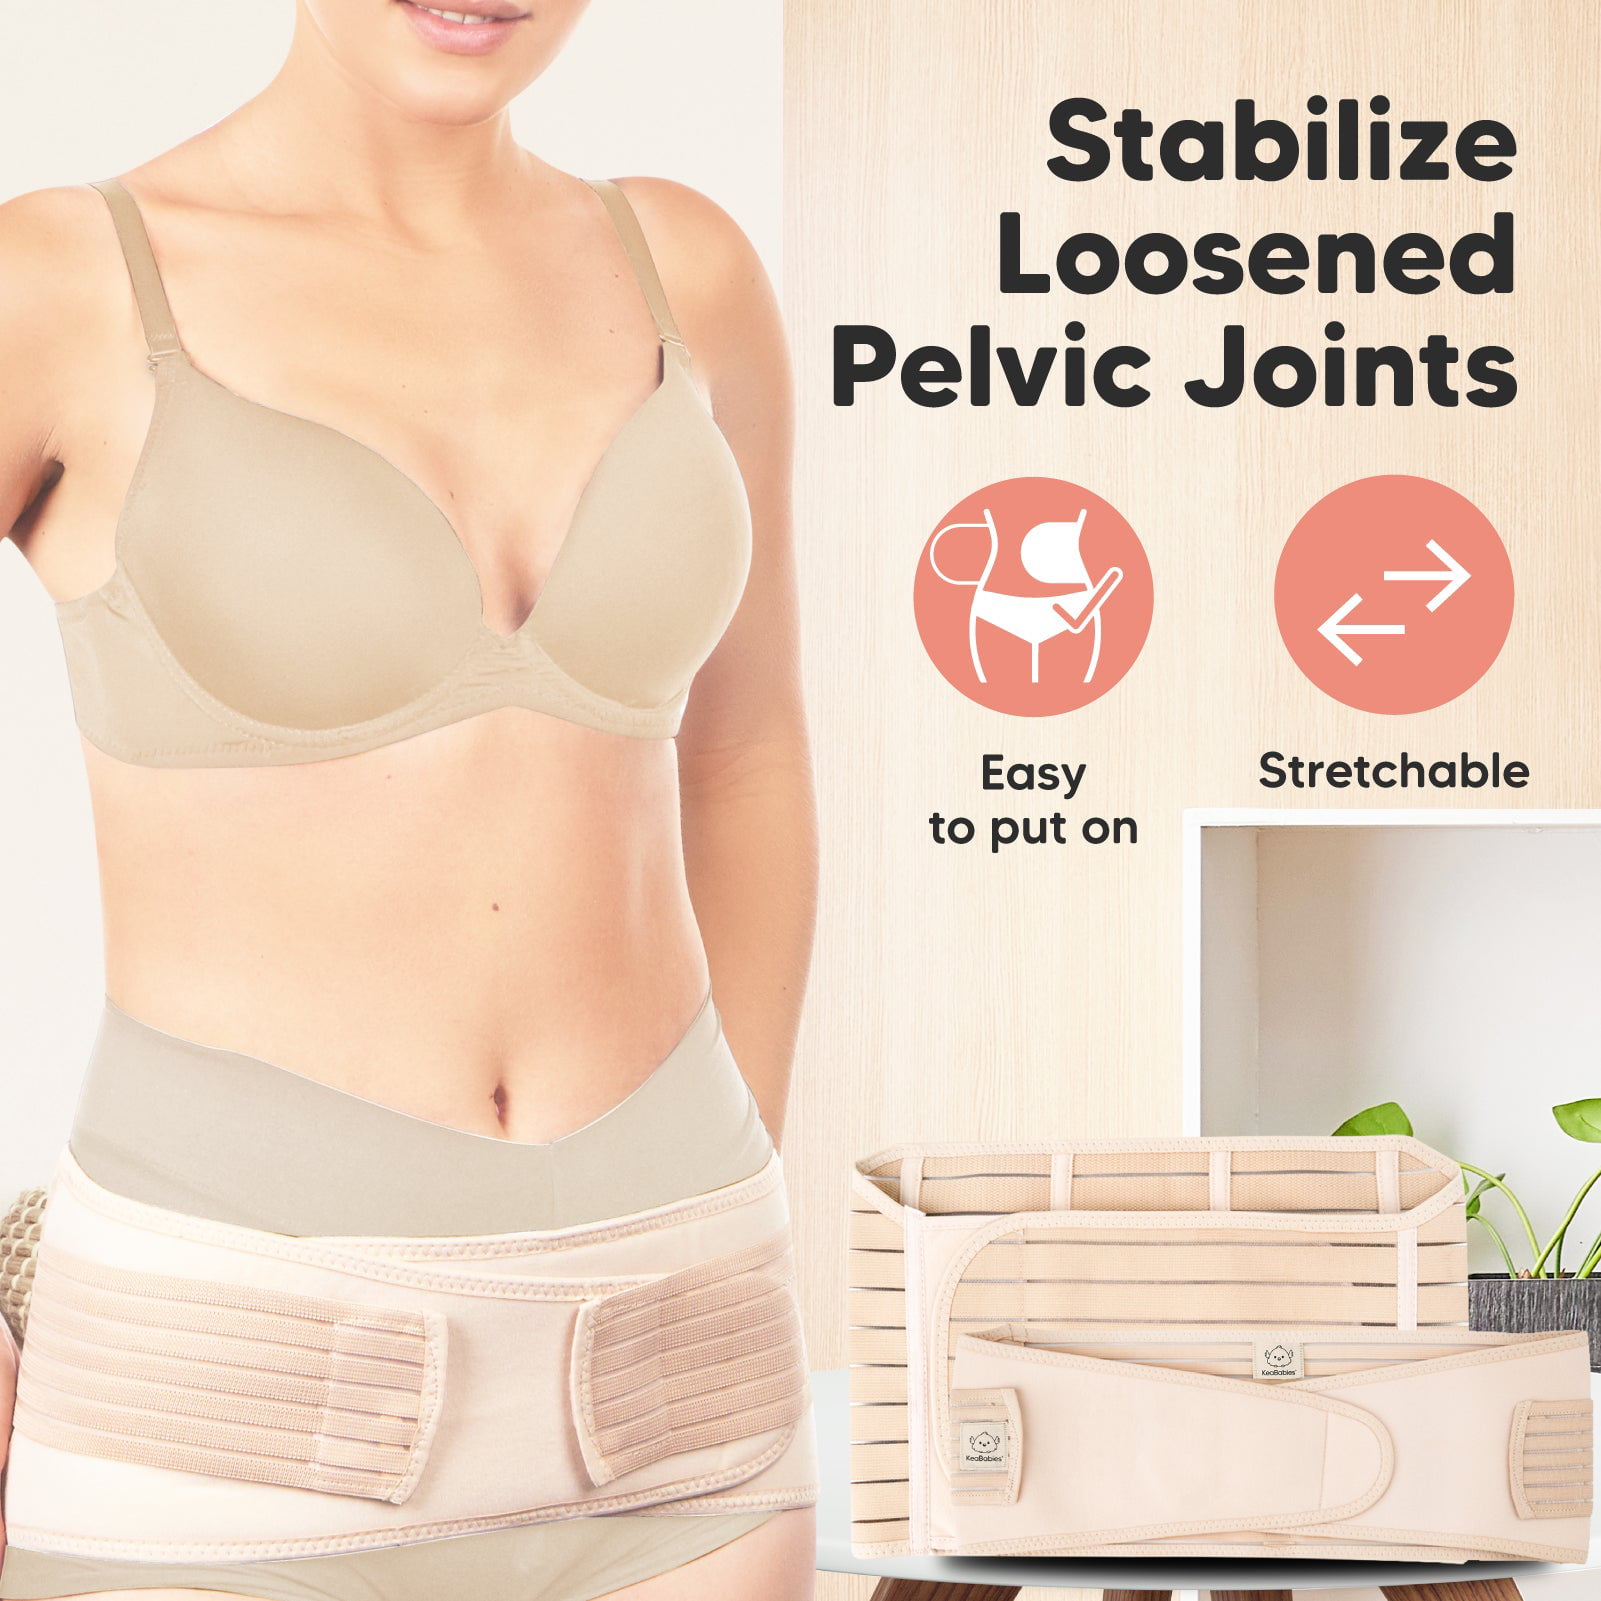 Revive 3-in-1 Postpartum Recovery Support Belt – KeaBabies